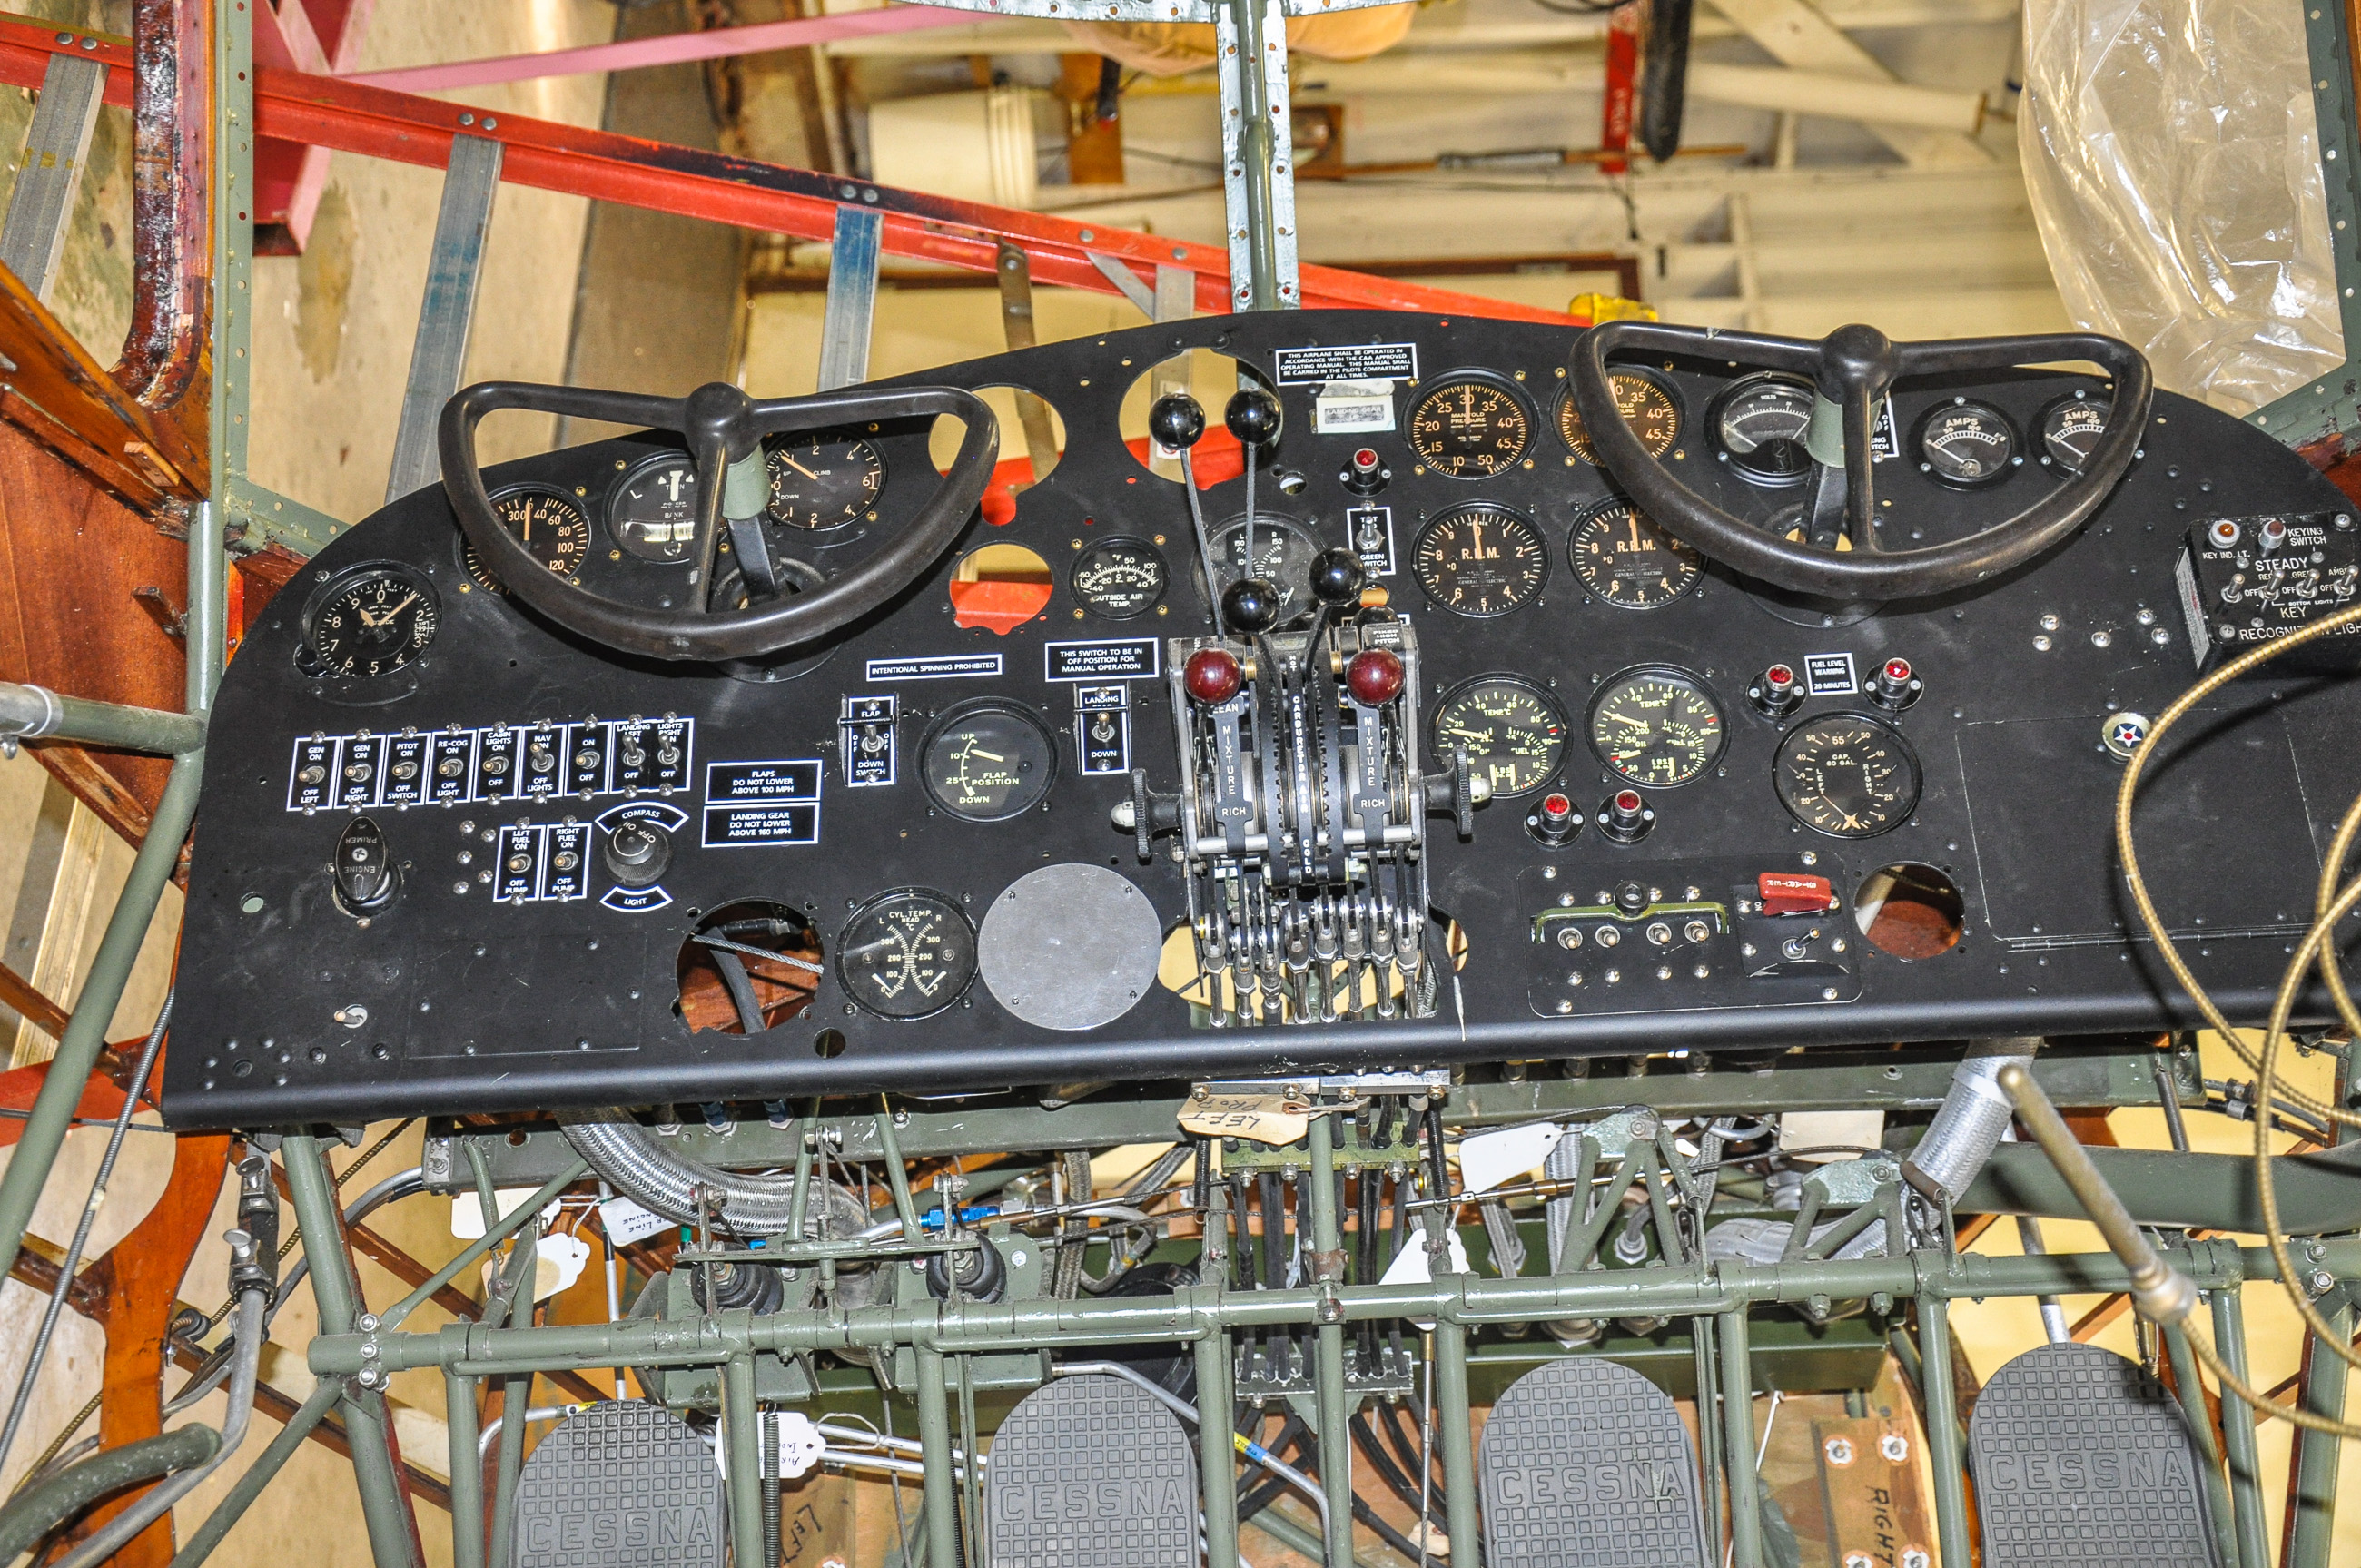 Detail of the instrument panel. (photo by David Cohen)